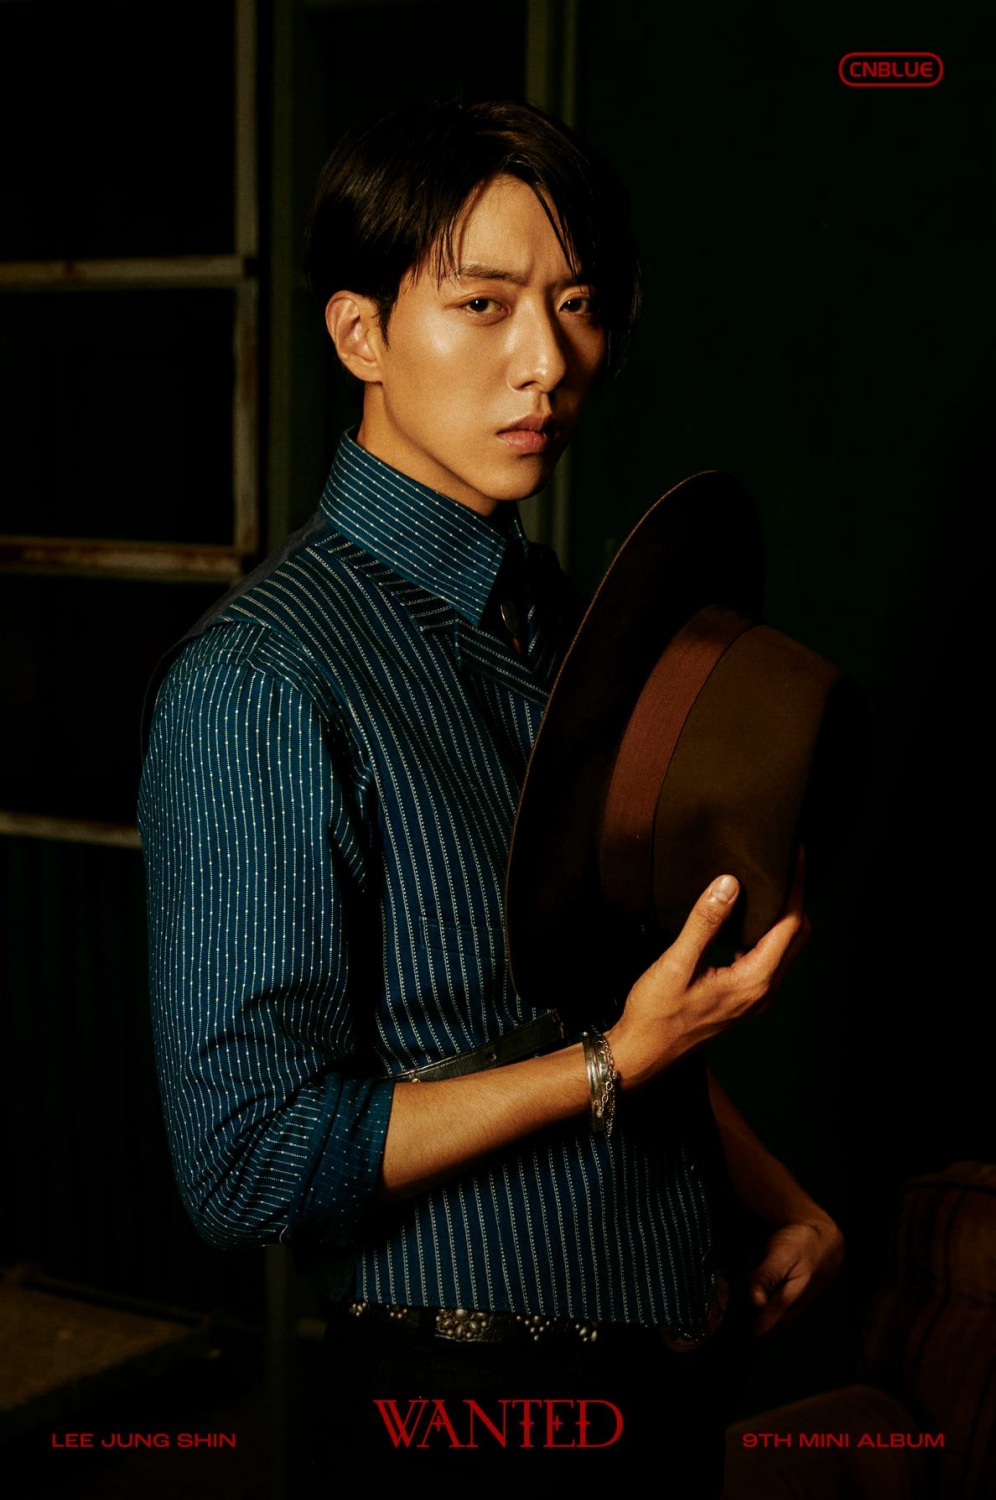 CNBLUE releases teaser for new album 'WANTED'... Charisma Hunter Transformation